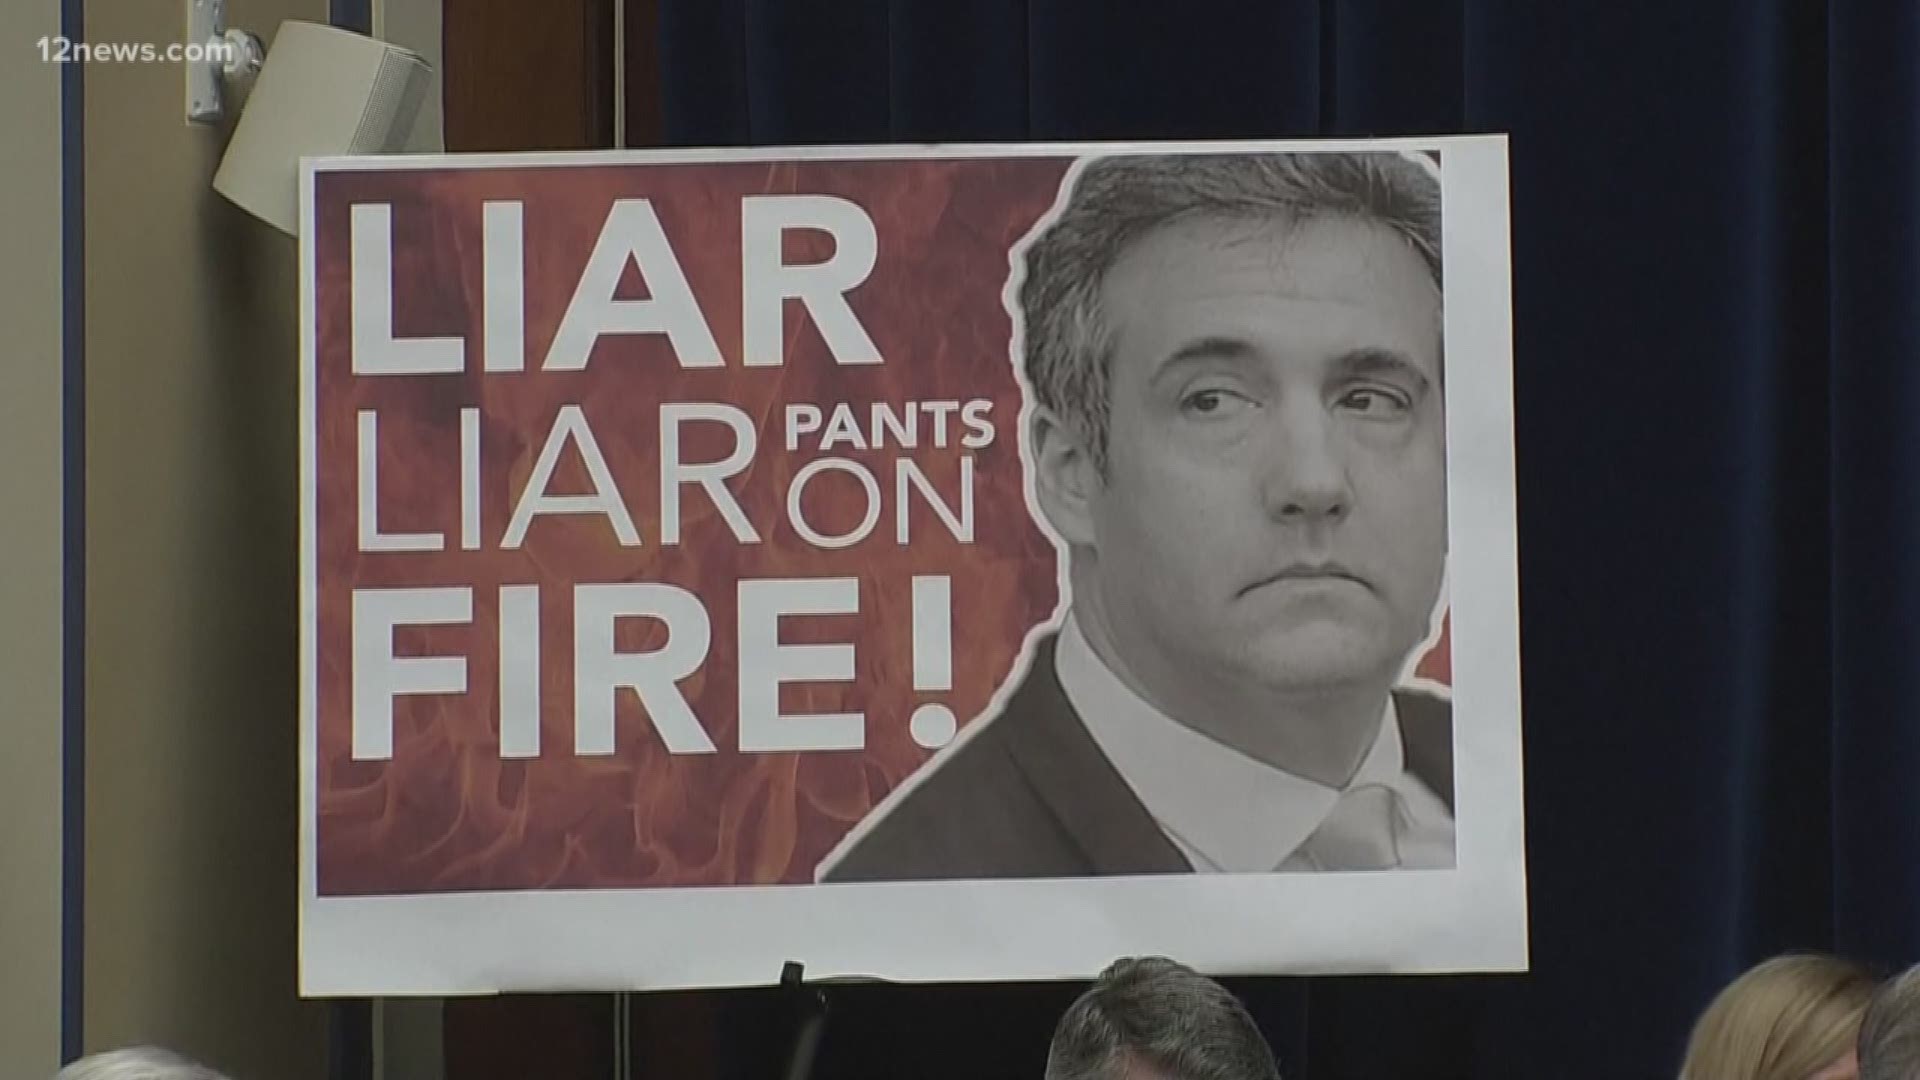 For his allotted three minutes of time during the House committee hearing, Gosar lectured Cohen like a child and said, "look at the old adage that our moms taught us - liar, liar, pants on fire."